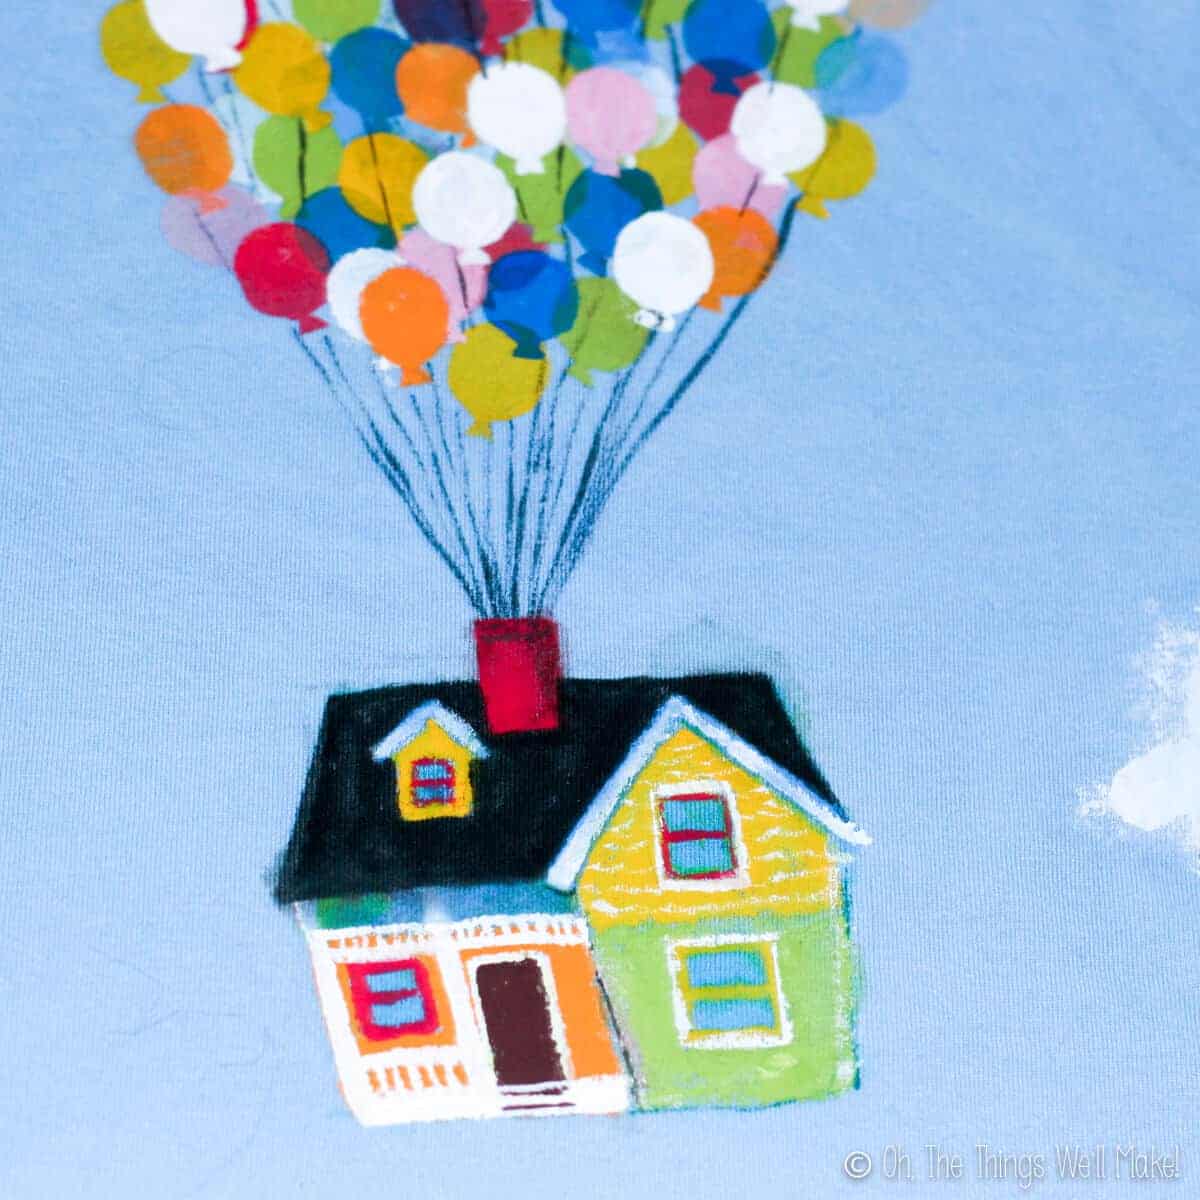 Closeup of the colorful "Up" house painted on a blue t-shirt with balloons pulling it up.